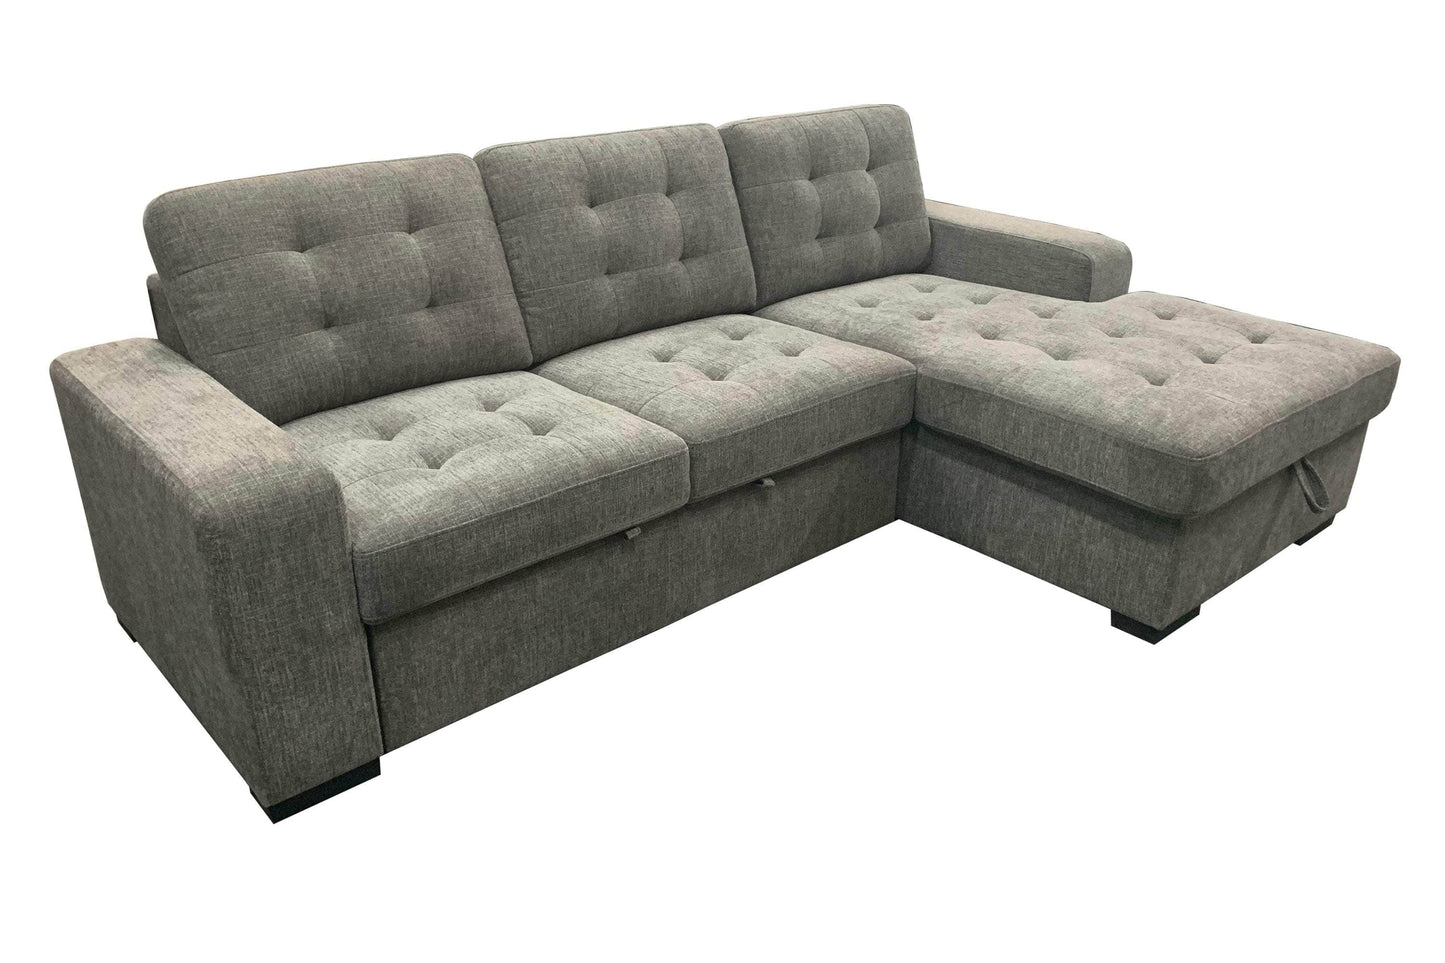 Urban Cali Sleeper Sectional Right Facing Chaise Coronado Tufted Sleeper Sectional Sofa with Storage Chaise in Nora Grey